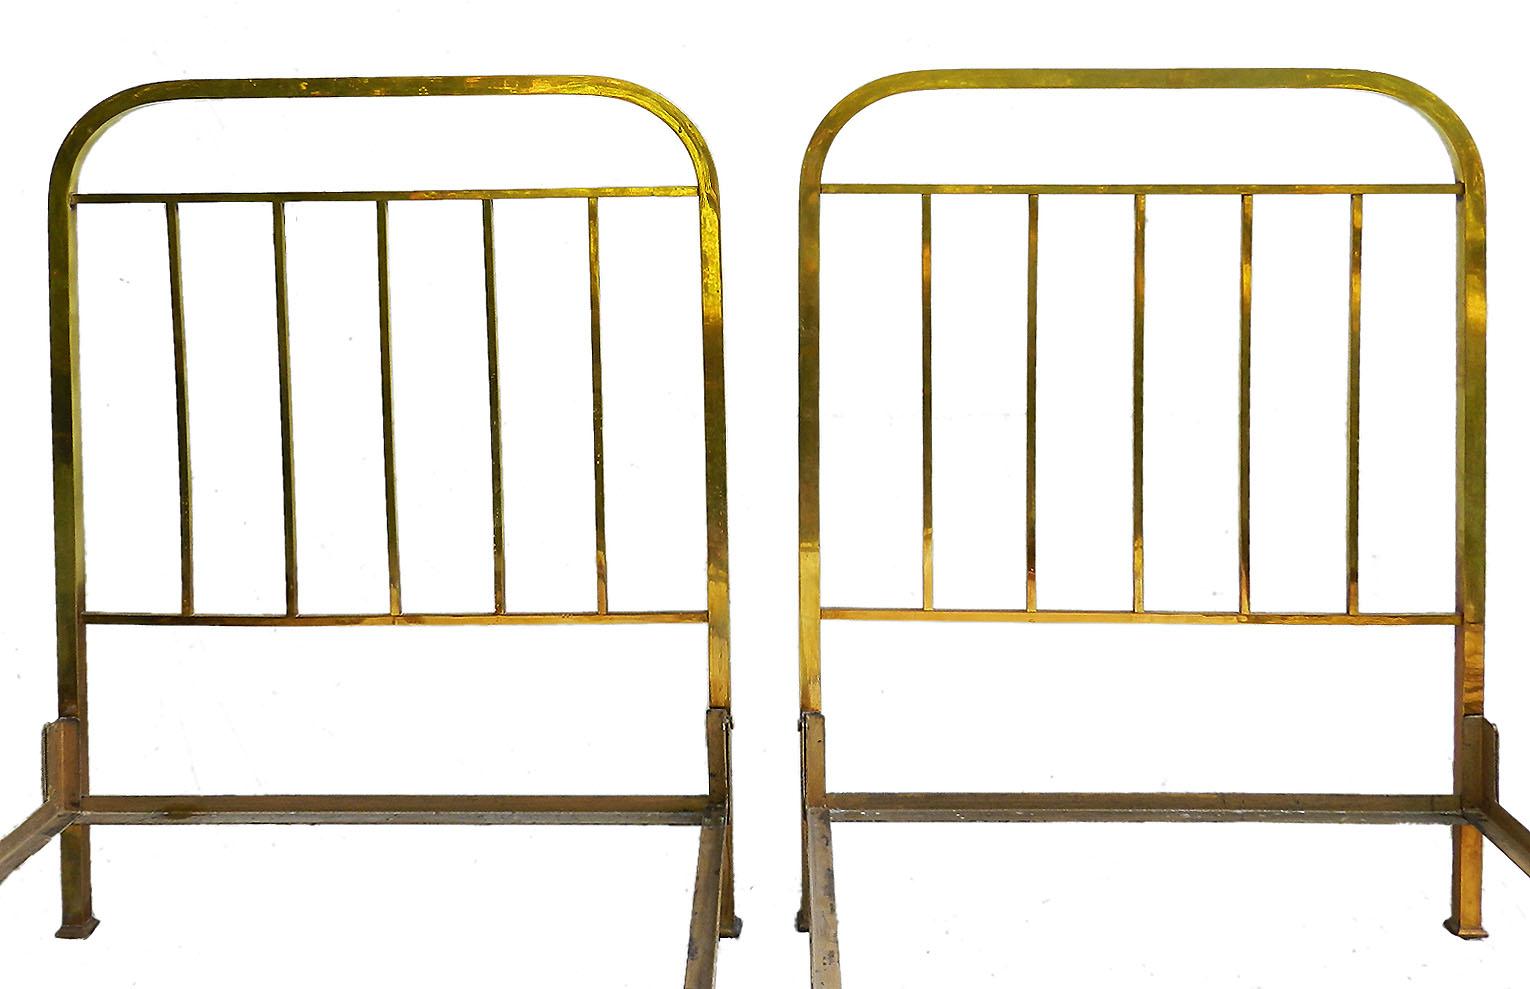 Pair of Art Deco Brass Beds Antique French Single Twin circa 1930 Makers Label 1